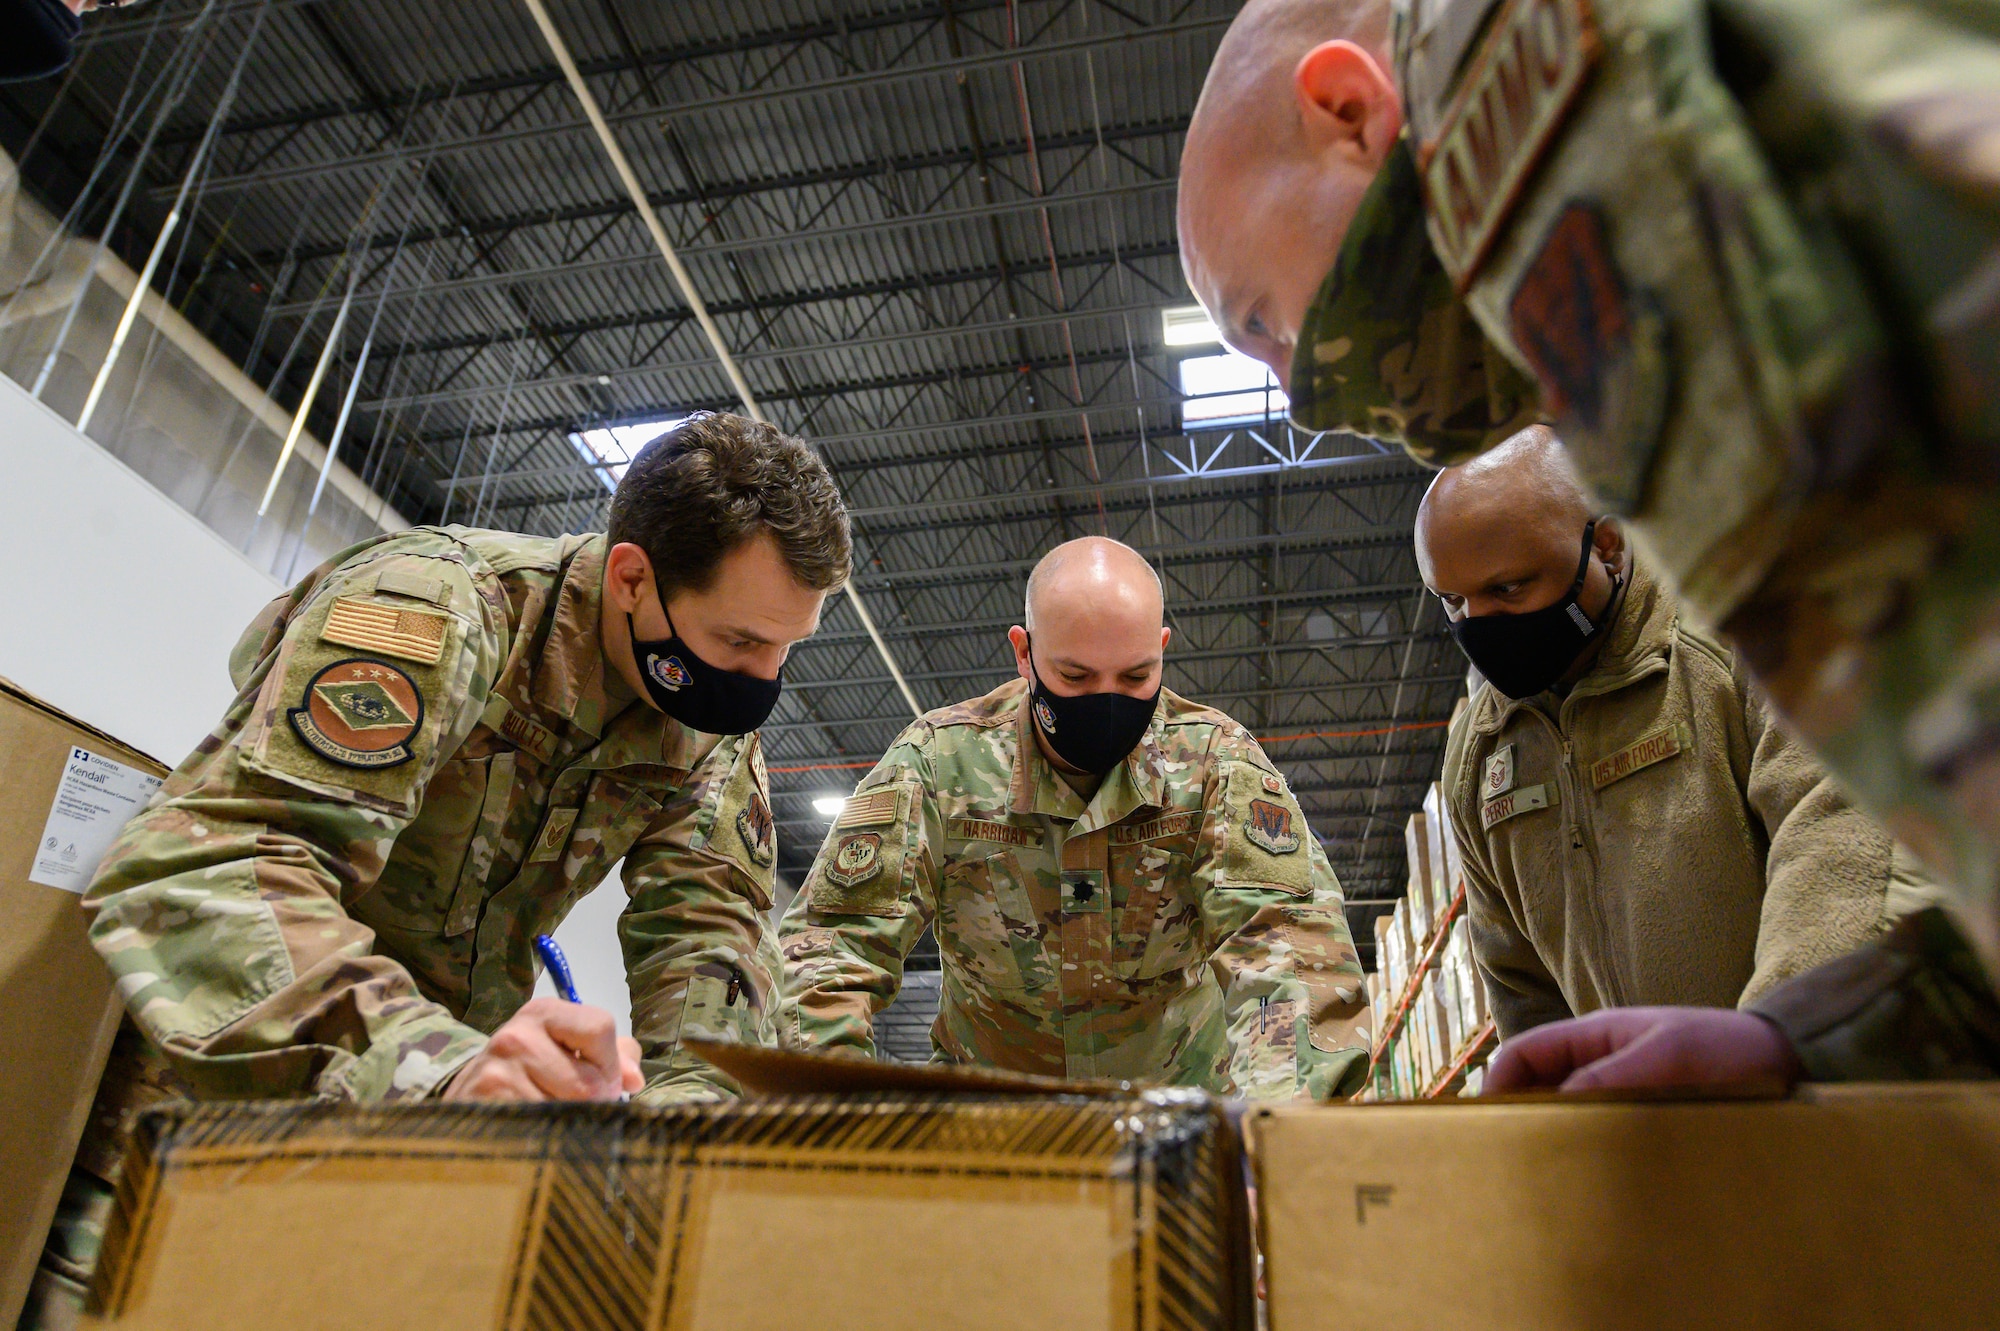 Airmen from the Maryland Air National Guard review distribution plans before transporting cases of Remdesivir, one of the therapeutic treatments believed to be effective against the omicron COVID-19 variant, on Jan. 14, 2022, at a Strategic National Stockpile warehouse in Maryland. At the direction of Governor Larry Hogan, up to 1,000 MDNG members were activated to assist state and local health officials with their response to rising COVID-19 cases and hospitalizations to include the distribution of treatment medicine and personal protective equipment. (U.S. Air National Guard photo by Staff Sgt. Sarah M. McClanahan)